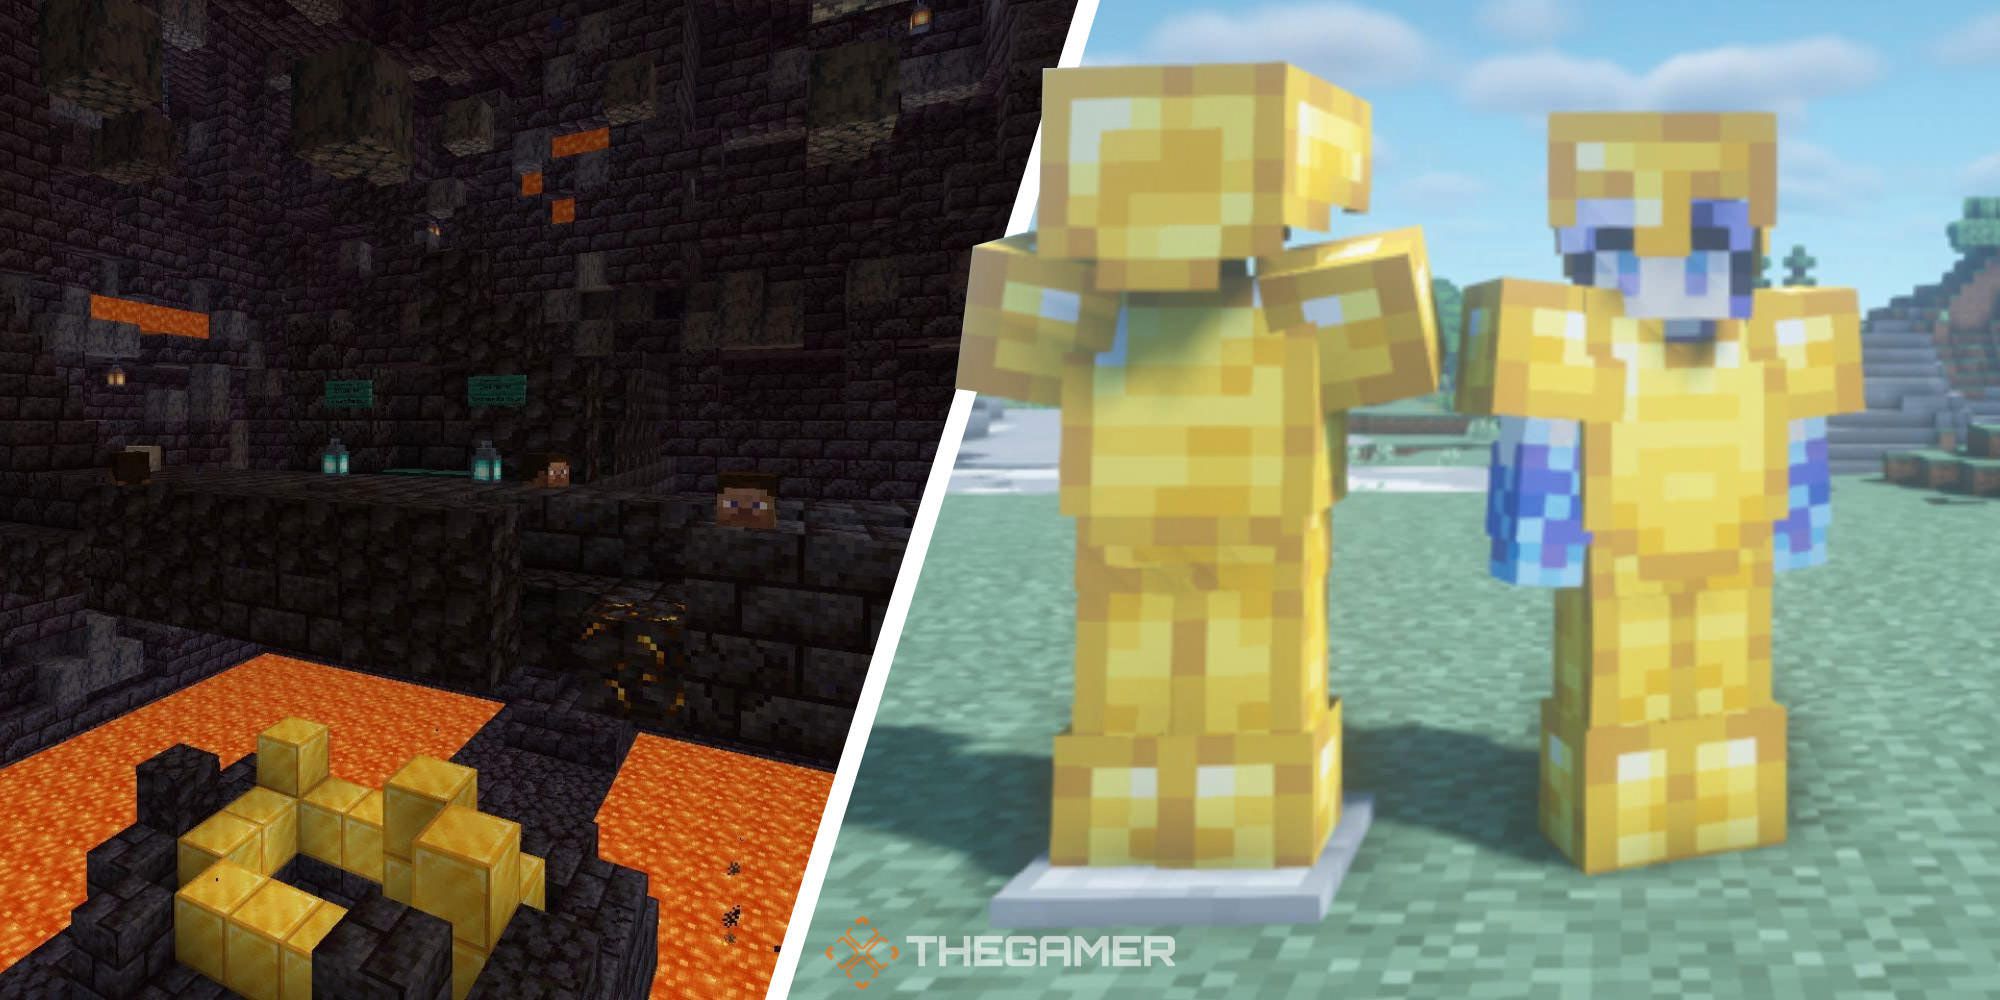 Minecraft: Every Armor Set And How To Get Them